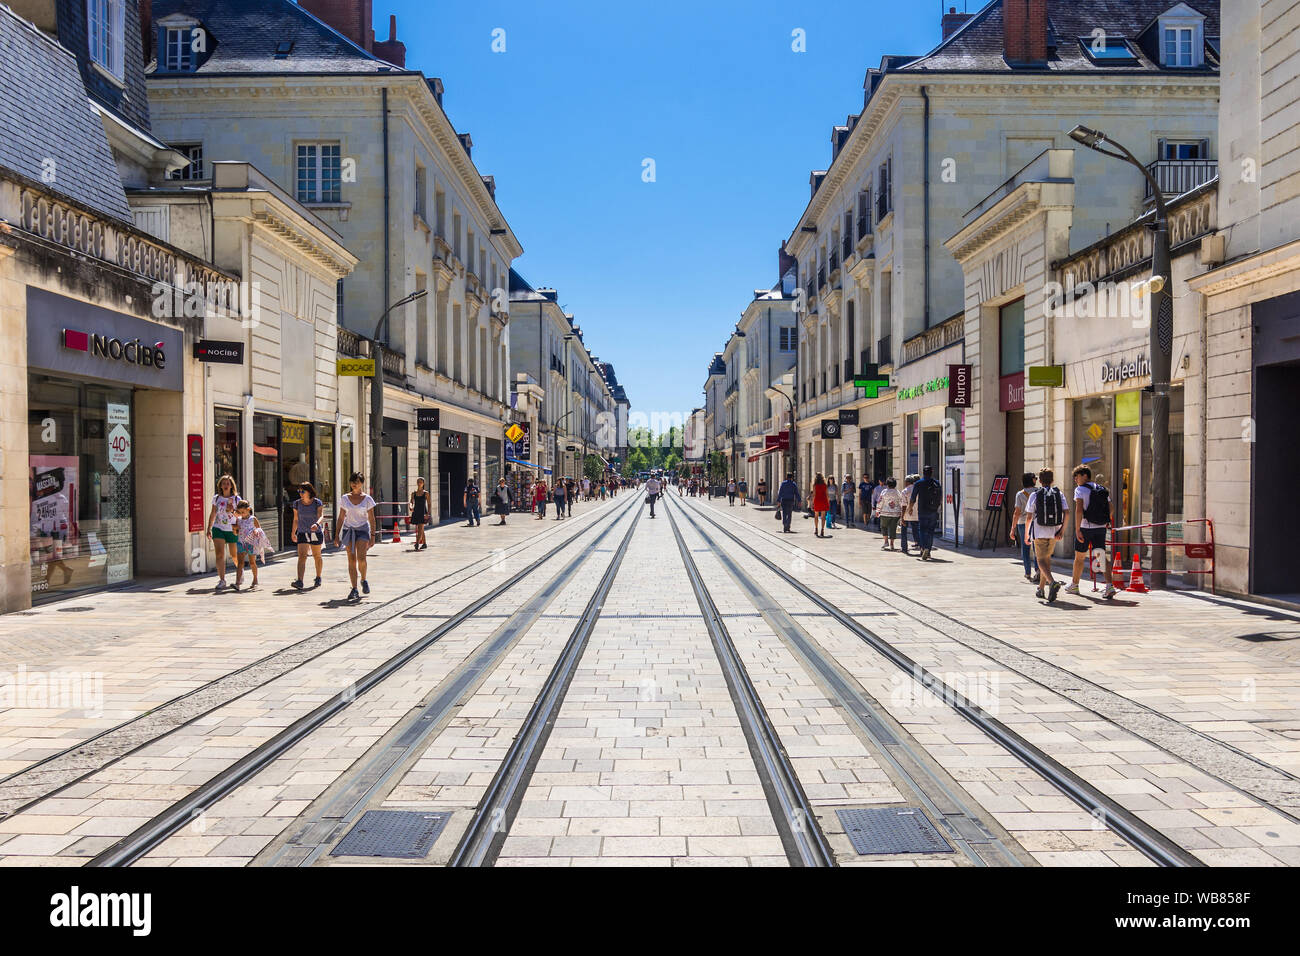 'Fil Bleu' public tramway operated by Keolis in centre of Tours, Indre-et-Loire, France. Stock Photo